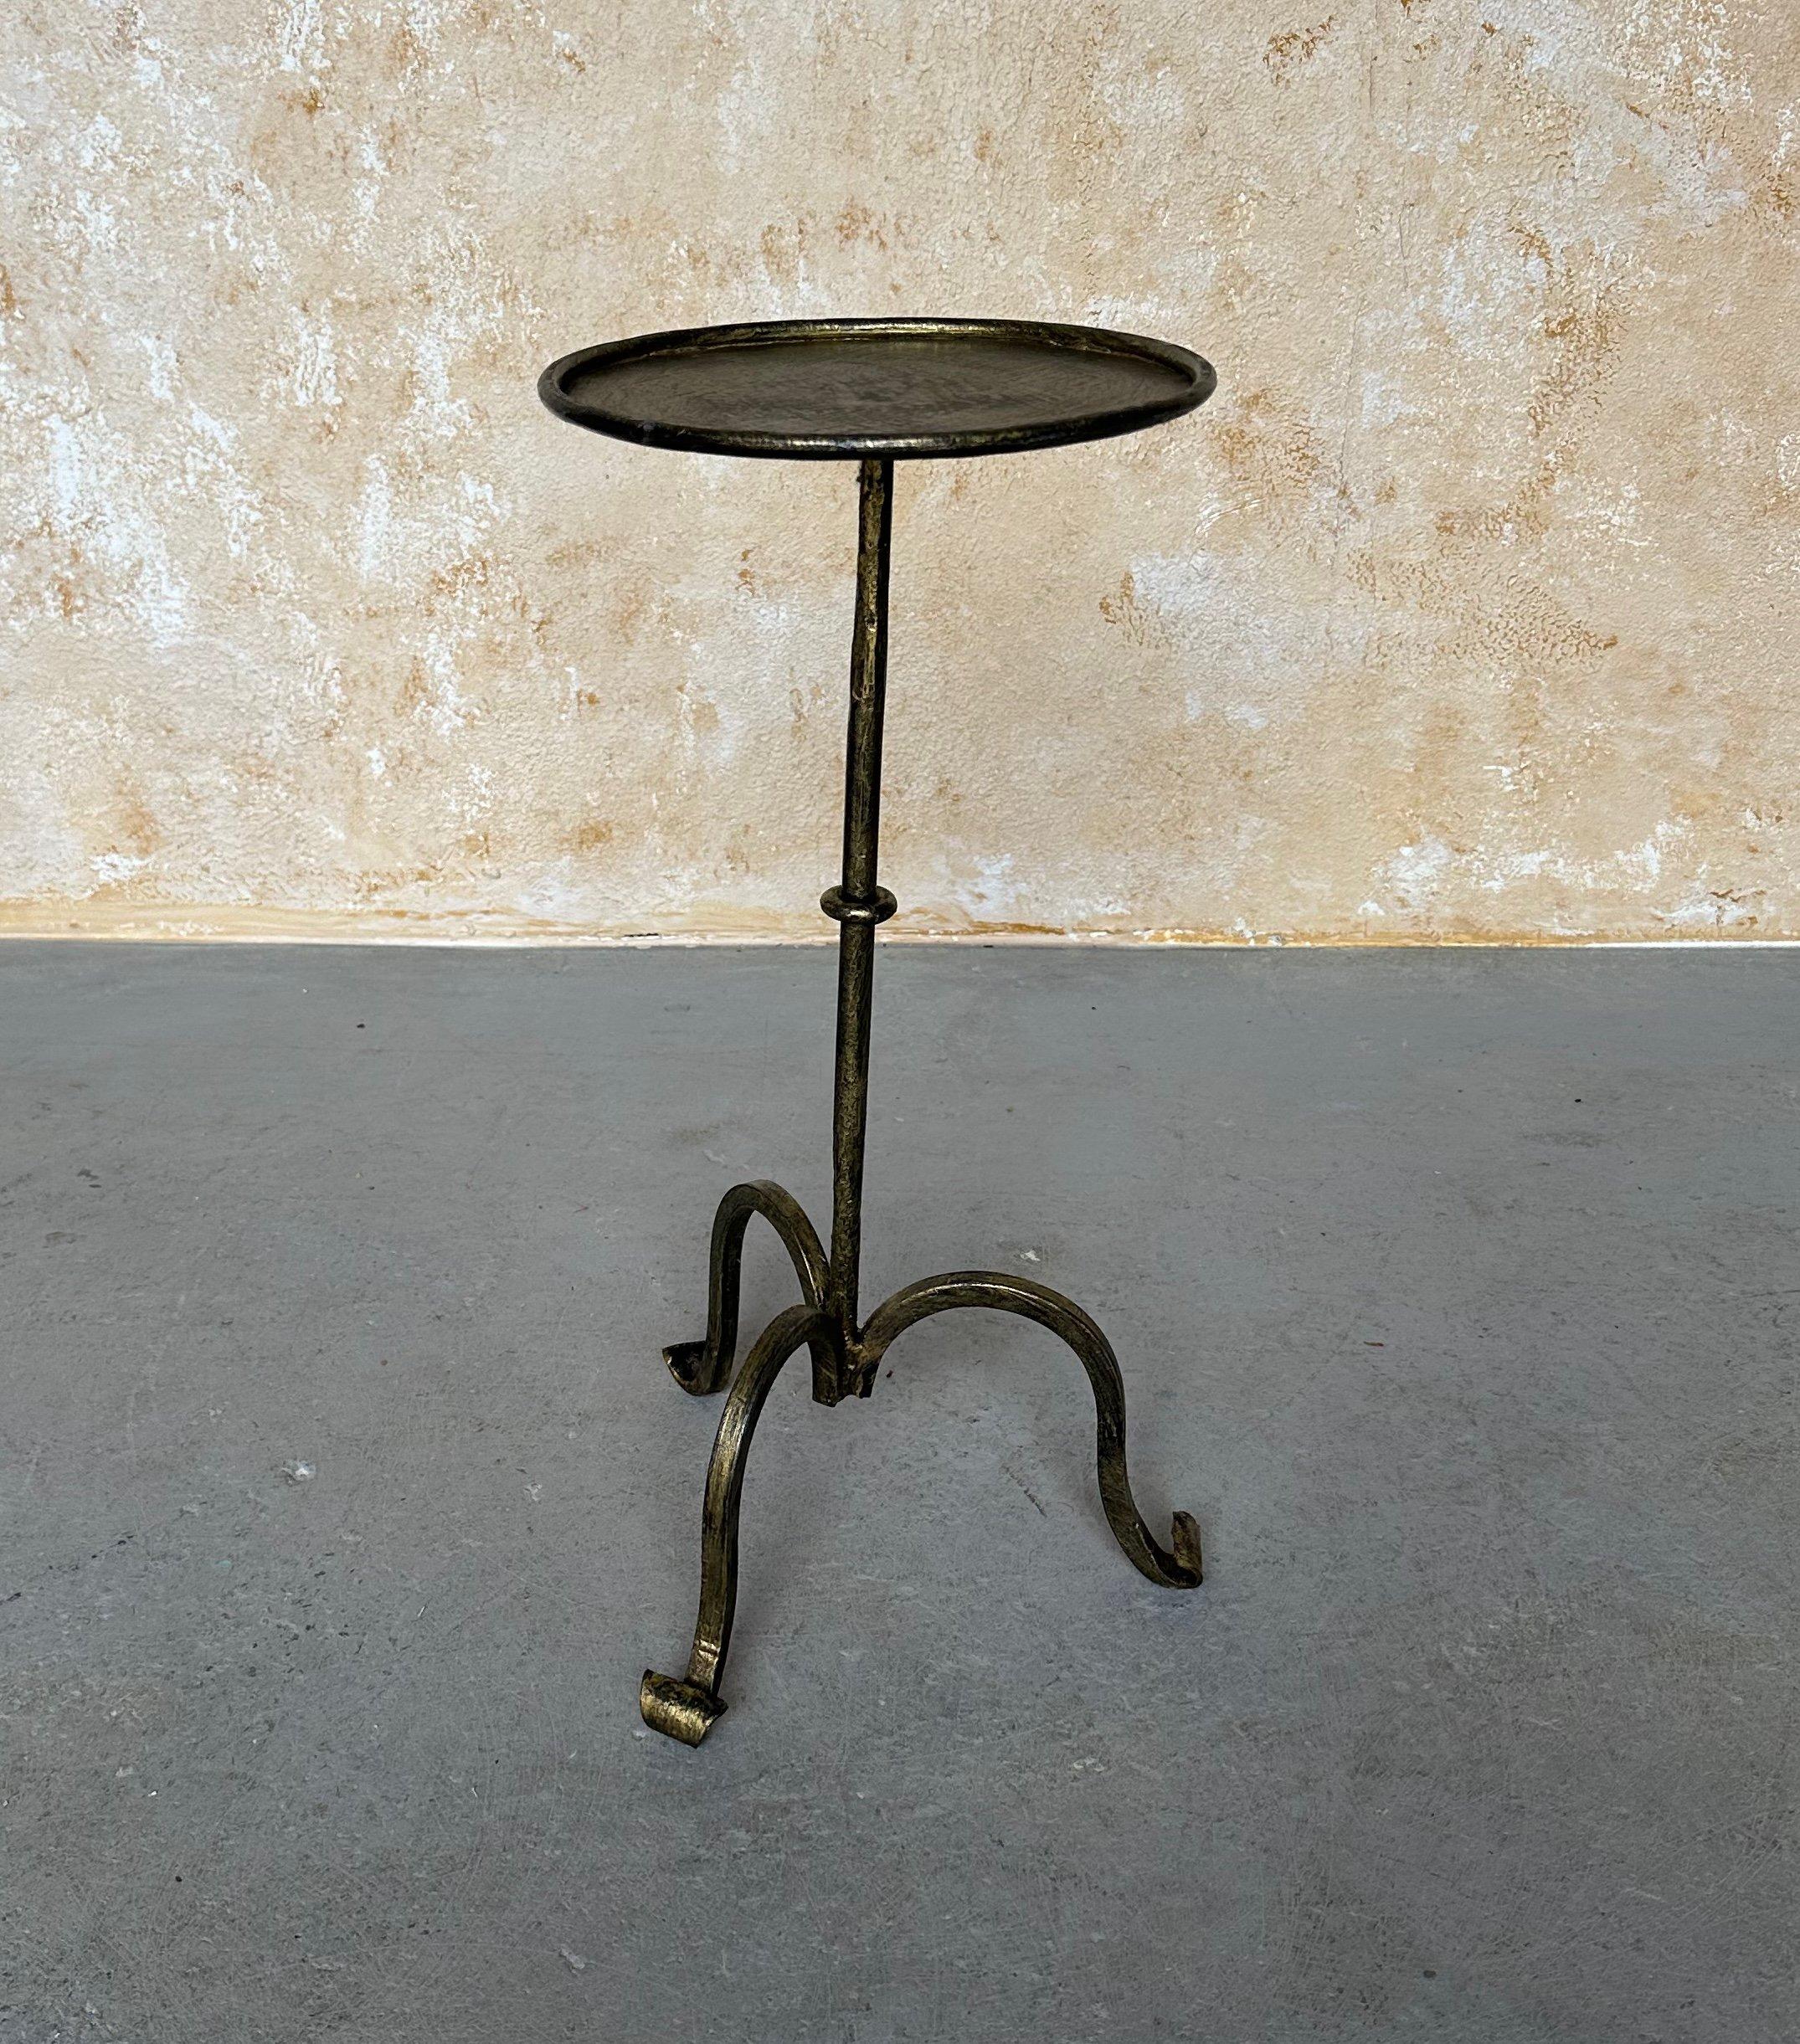 This small Spanish iron drinks table was recently handcrafted by accomplished European artisans using traditional iron-working methods. Based on a vintage 1950s design, it features a central ring accent on the stem and a gracefully curved tripod